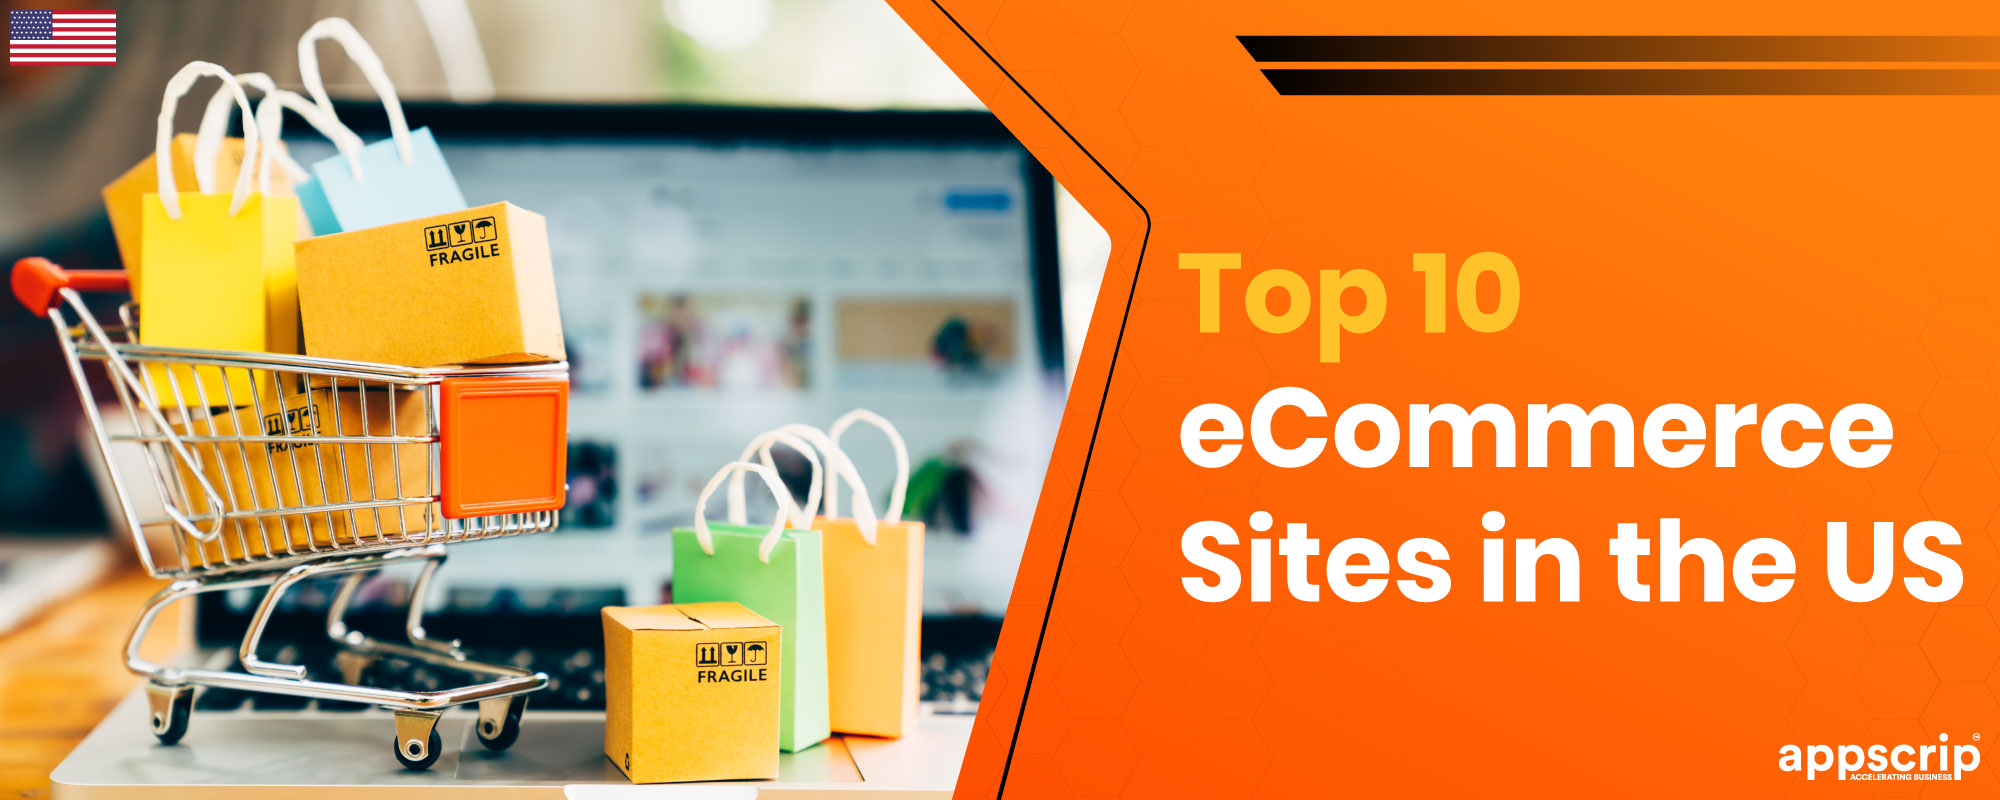 Top ecommerce sites in the USA